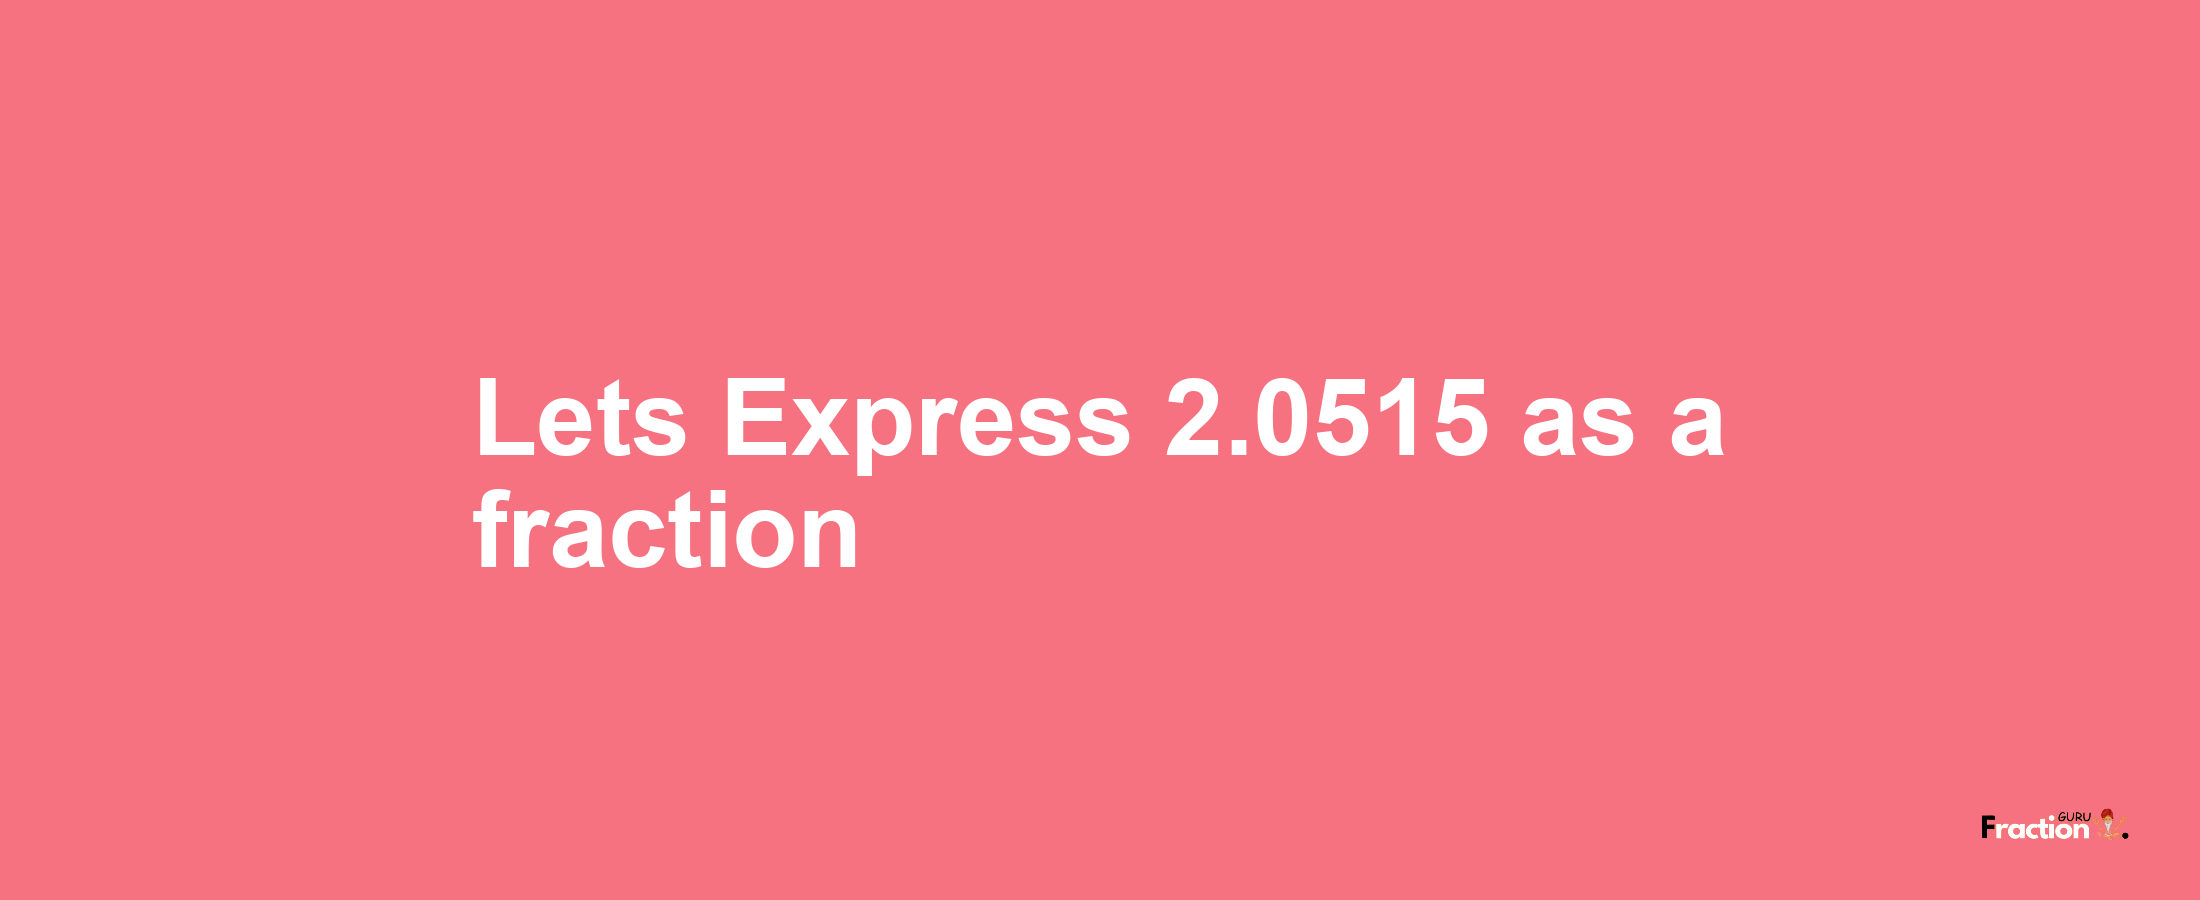 Lets Express 2.0515 as afraction